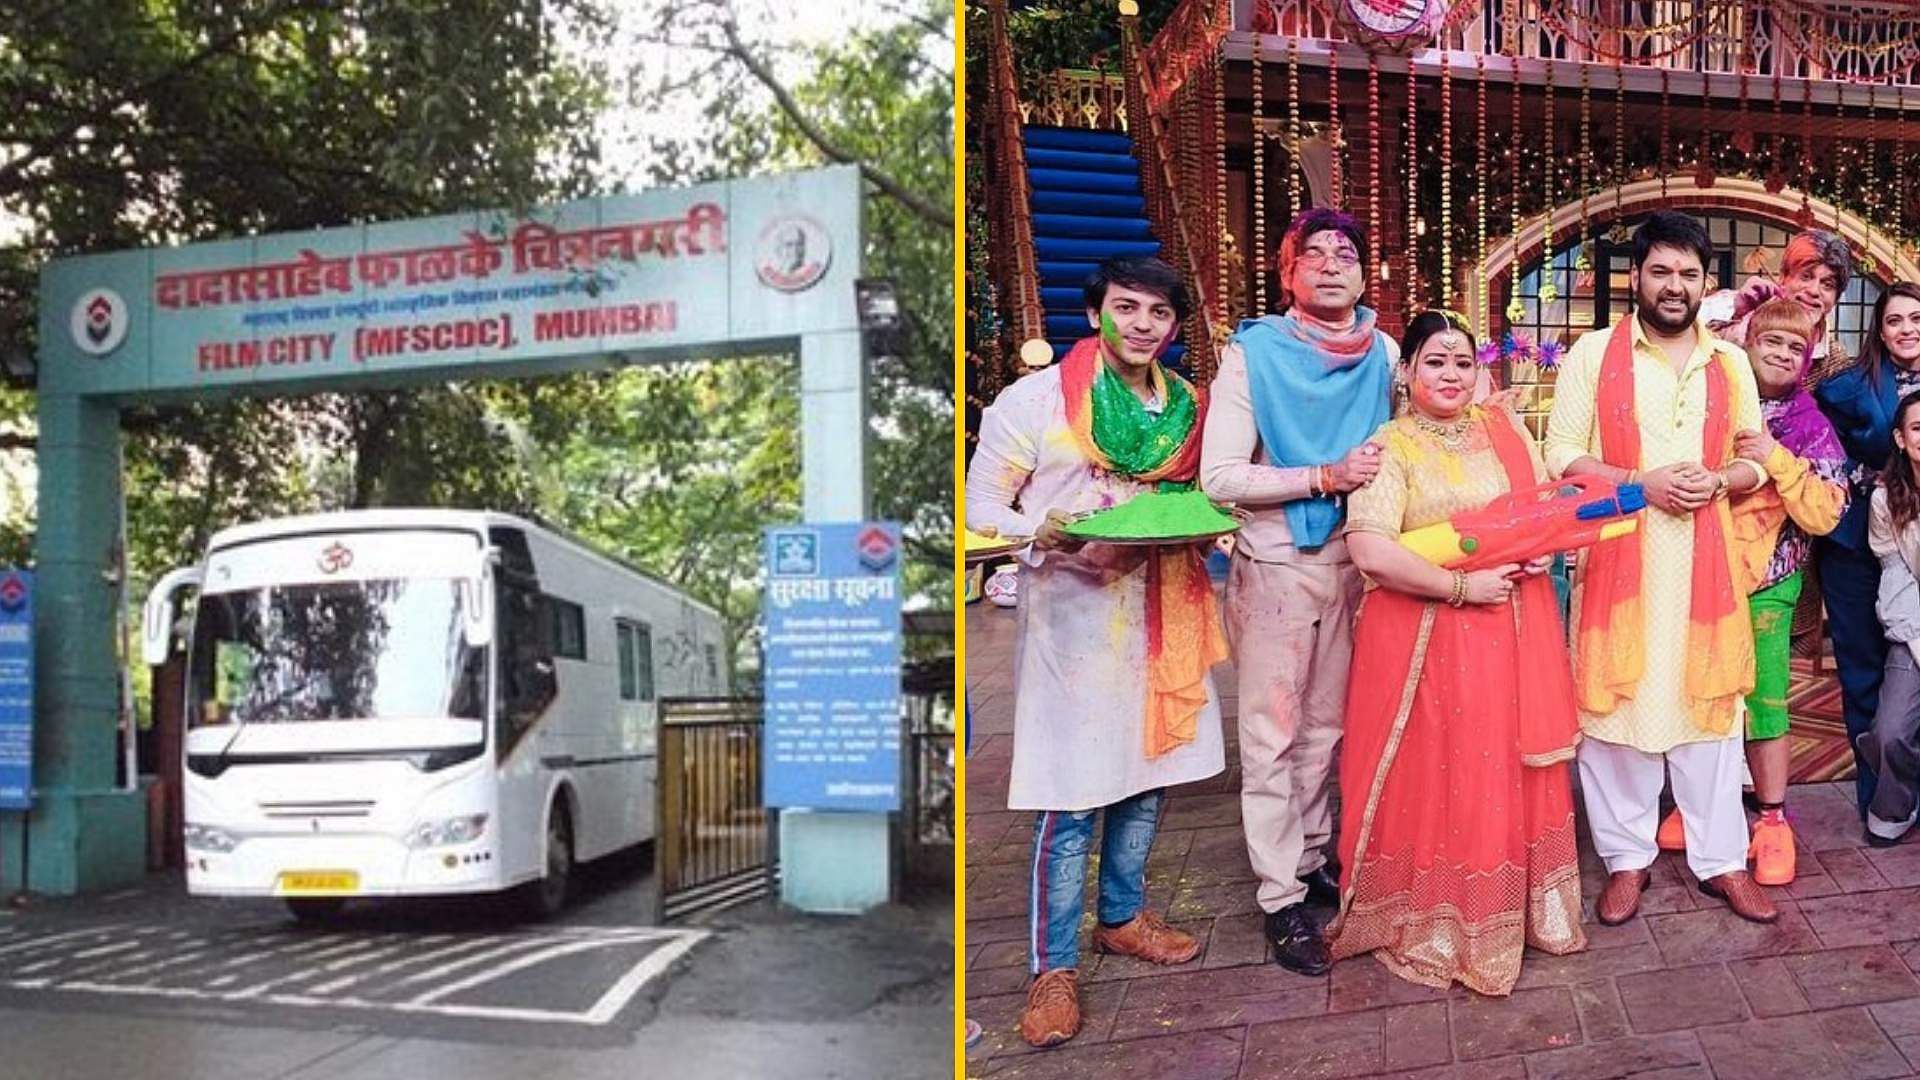 The BMC has directed Mumbai’s Film City to stop all shoots on its premises.